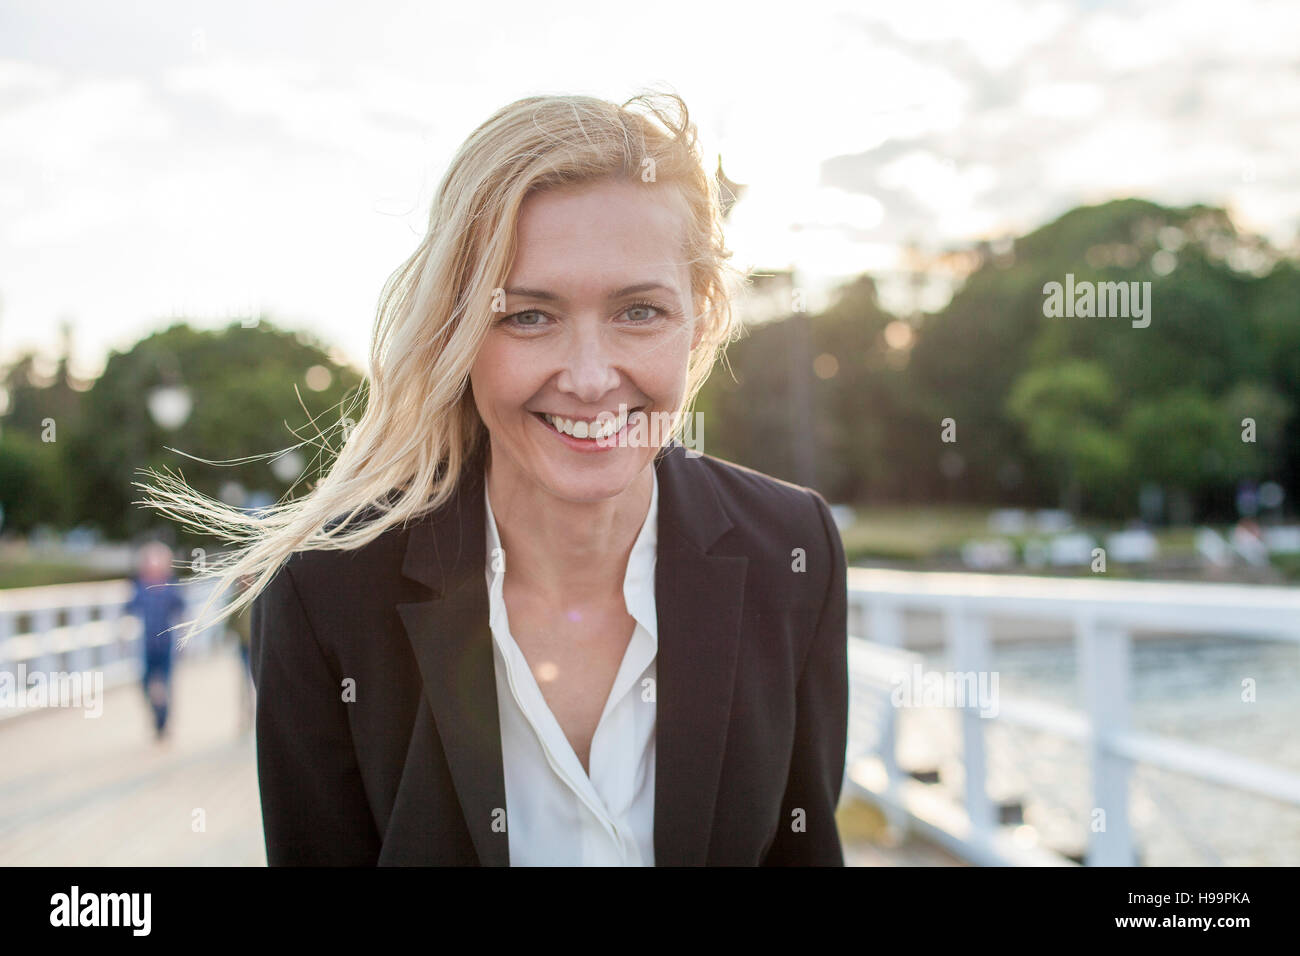 Portrait of businesswoman with blond hair Stock Photo